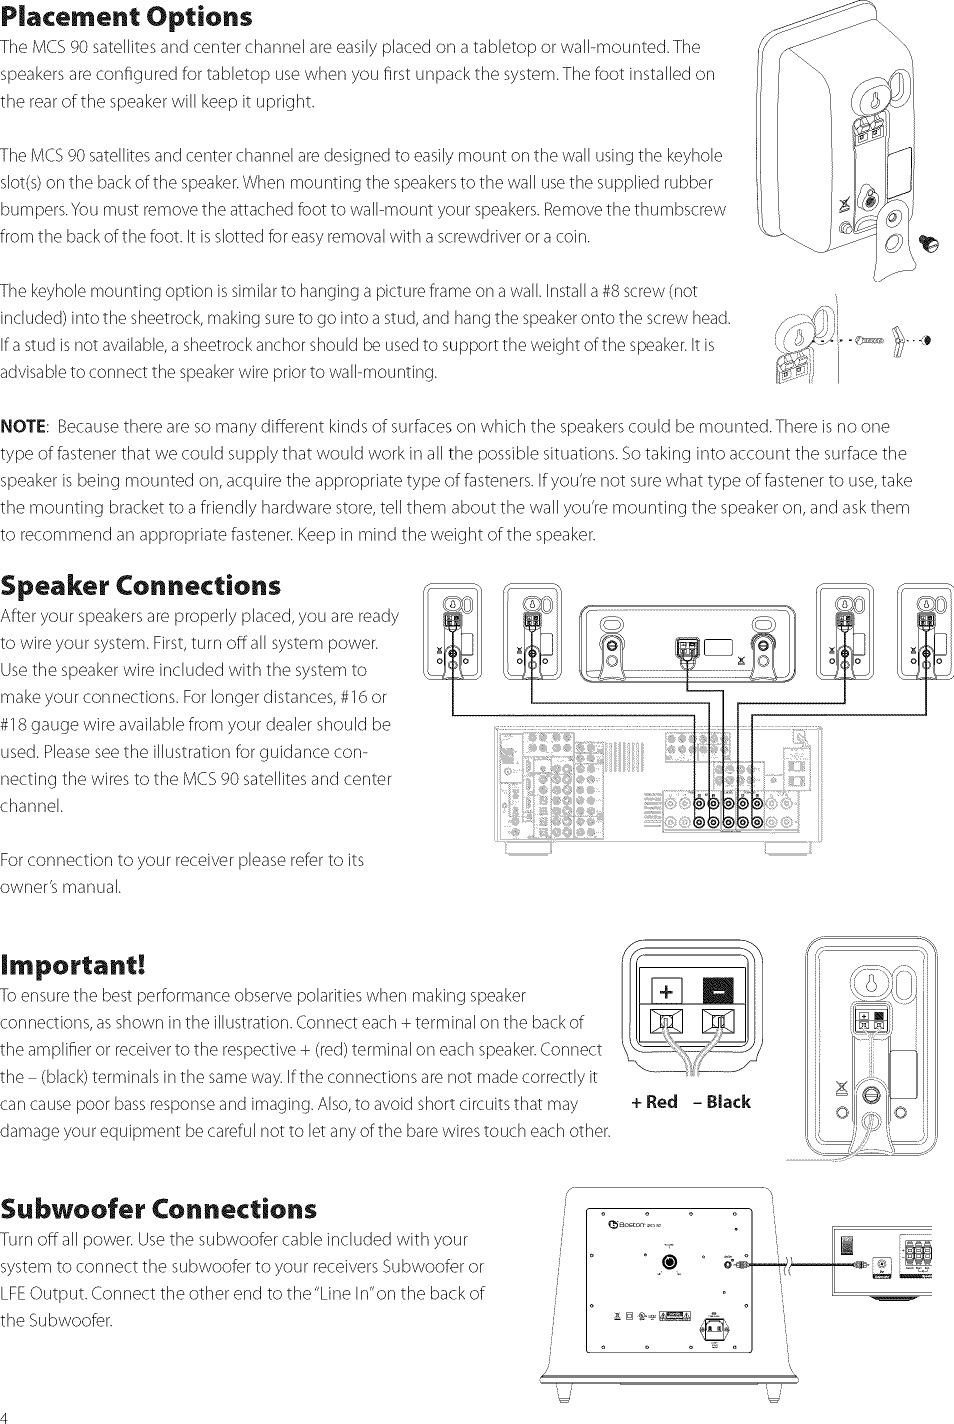 Page 4 of 7 - BOSTON  ACOUSTICS Speakers Manual L0808326